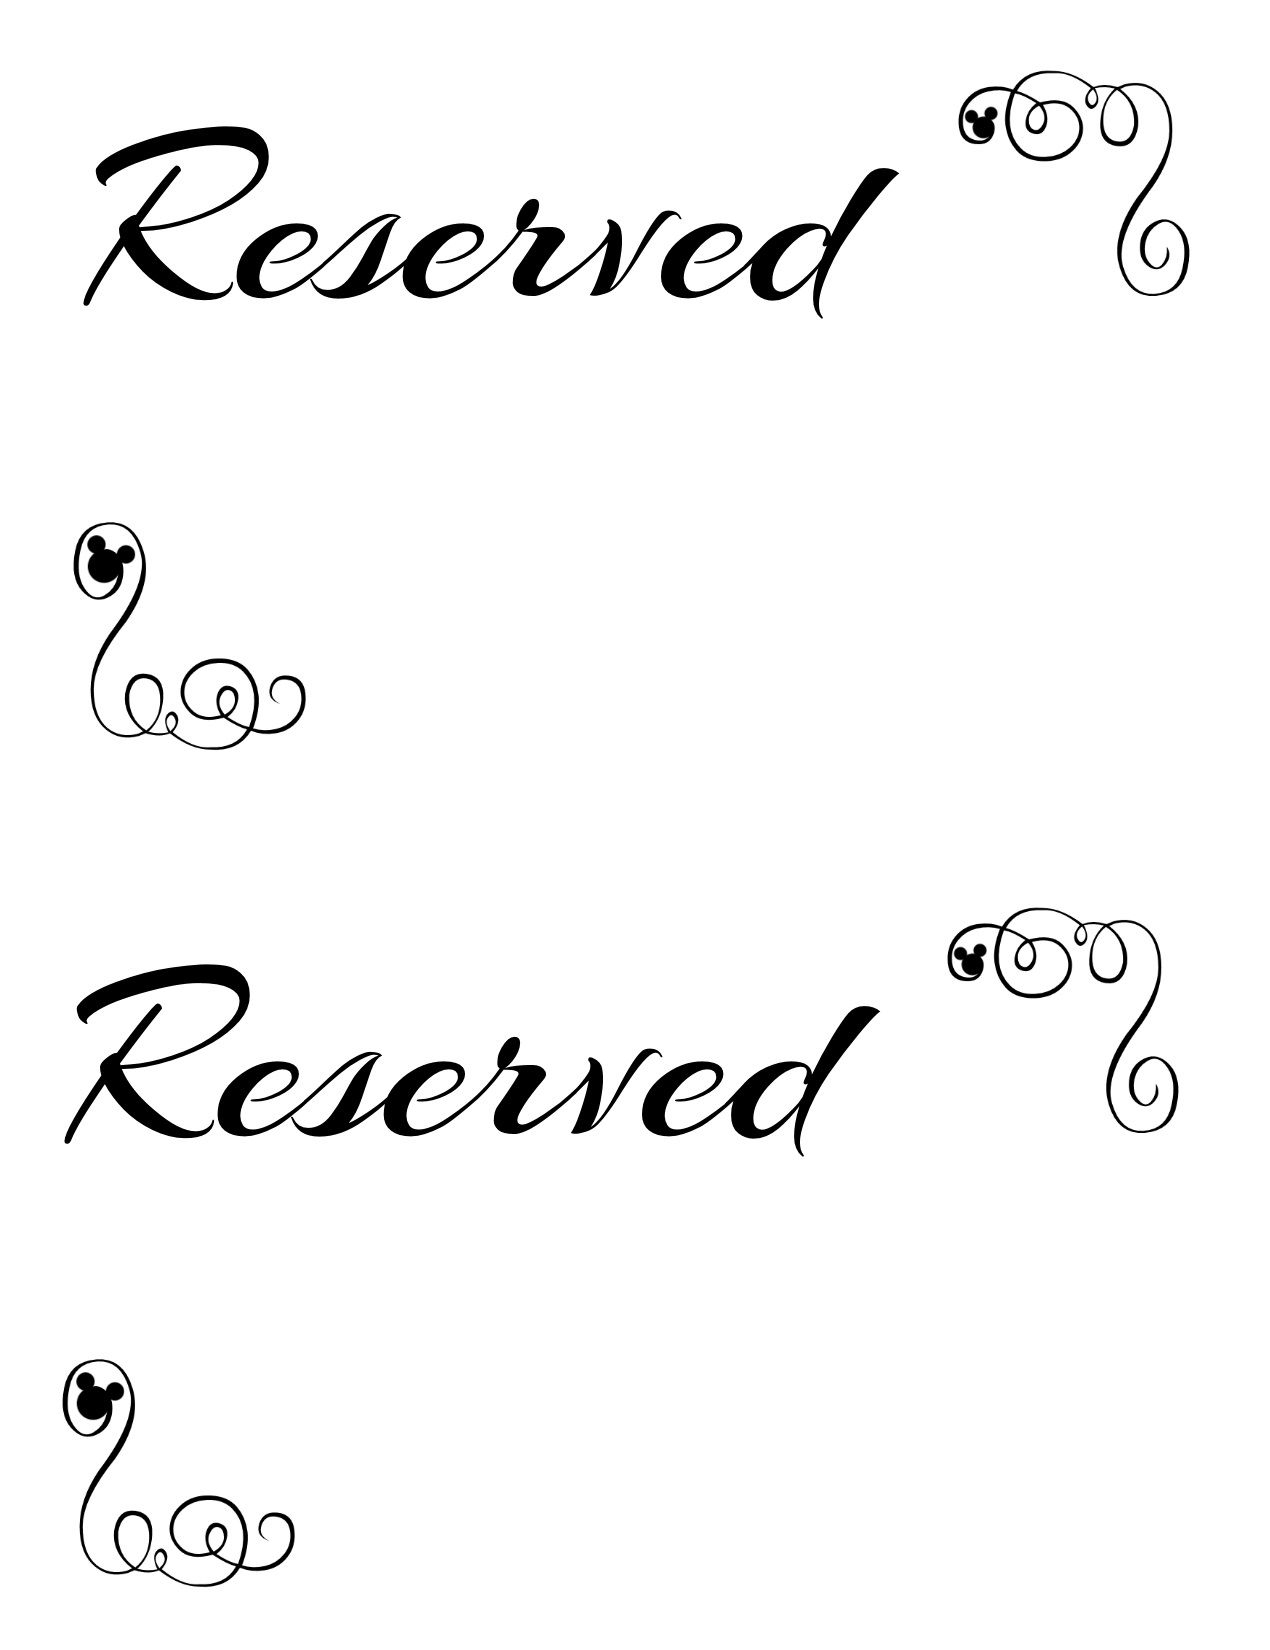 Free Printable Reserved Seating Signs For Your Wedding Ceremony - Free Printable Welcome Sign Template